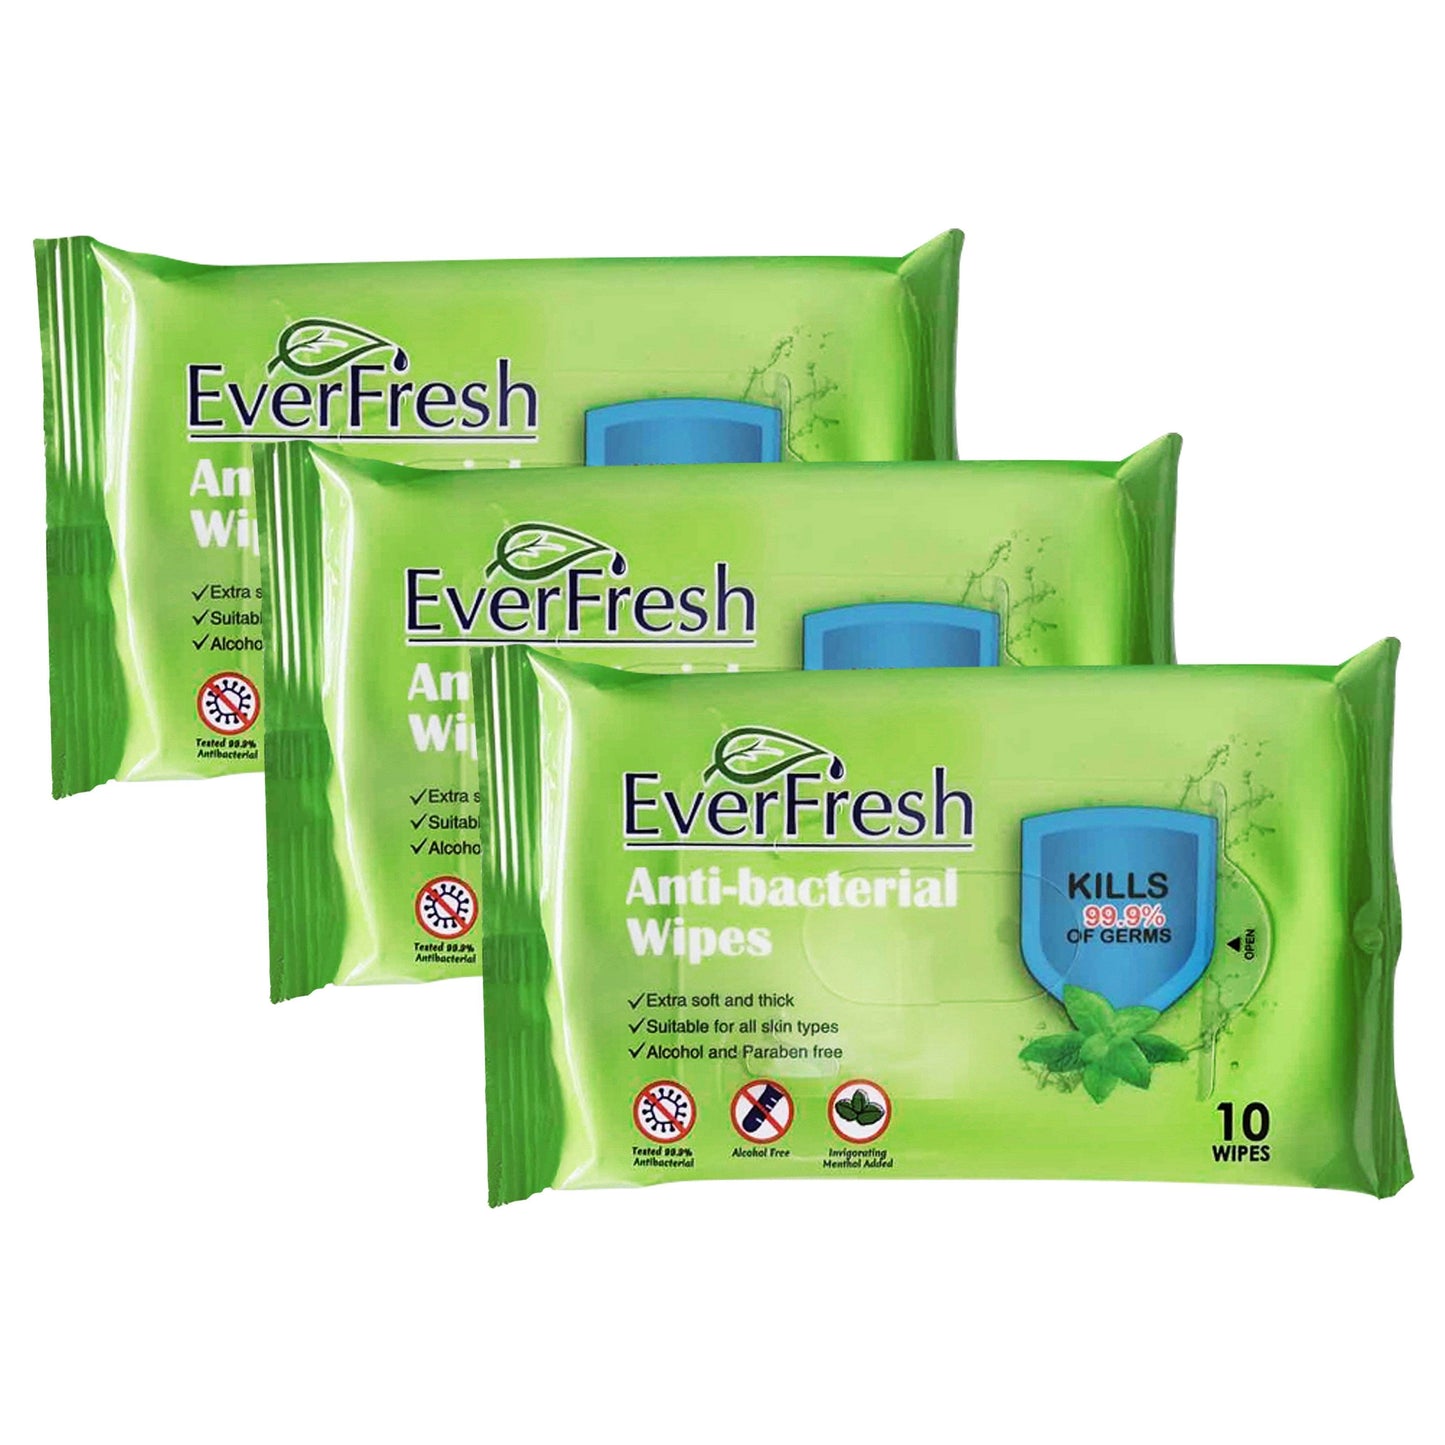 Ever Fresh Anti-Bacterial Wipes (10 ct) - 3 Pack (48 Cases = 2304 ct. per Pallet) (Unit Price - $0.50)